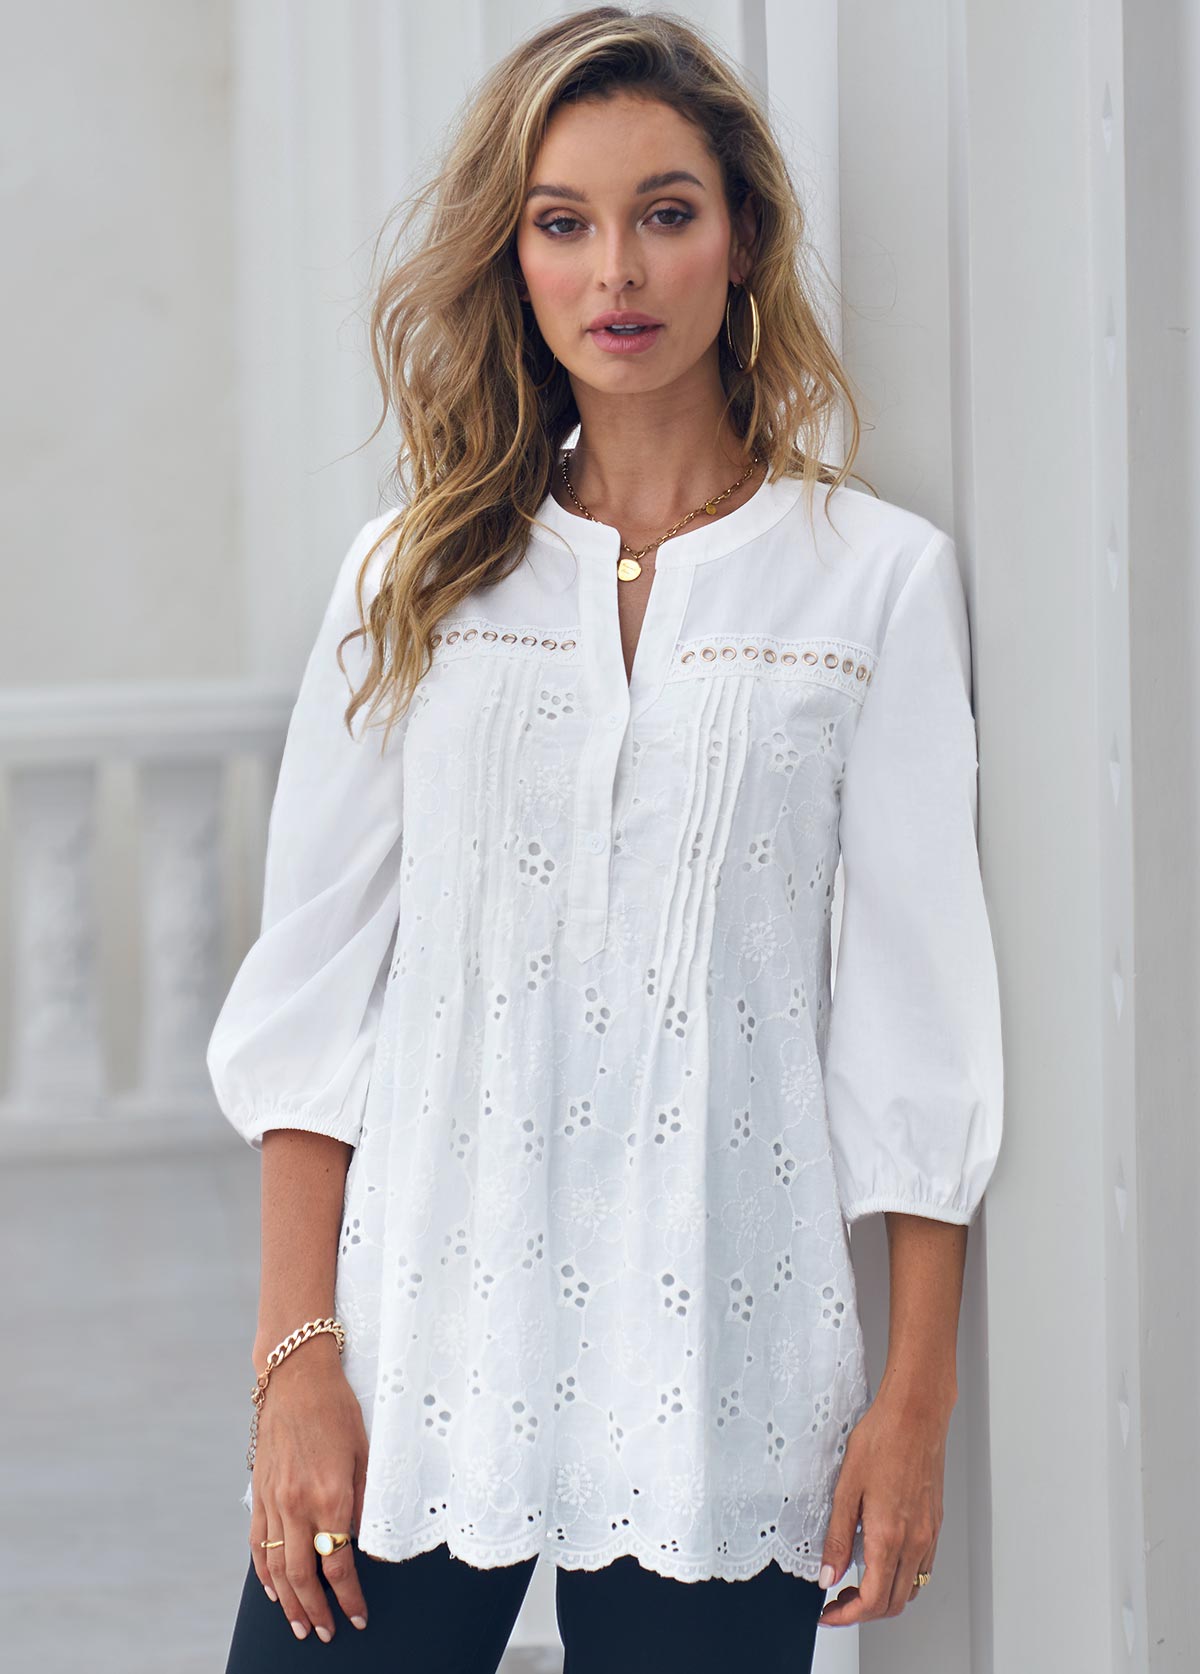 Embroidered Hollow Out Split Neck White Blouse | modlily.com - USD 33.98